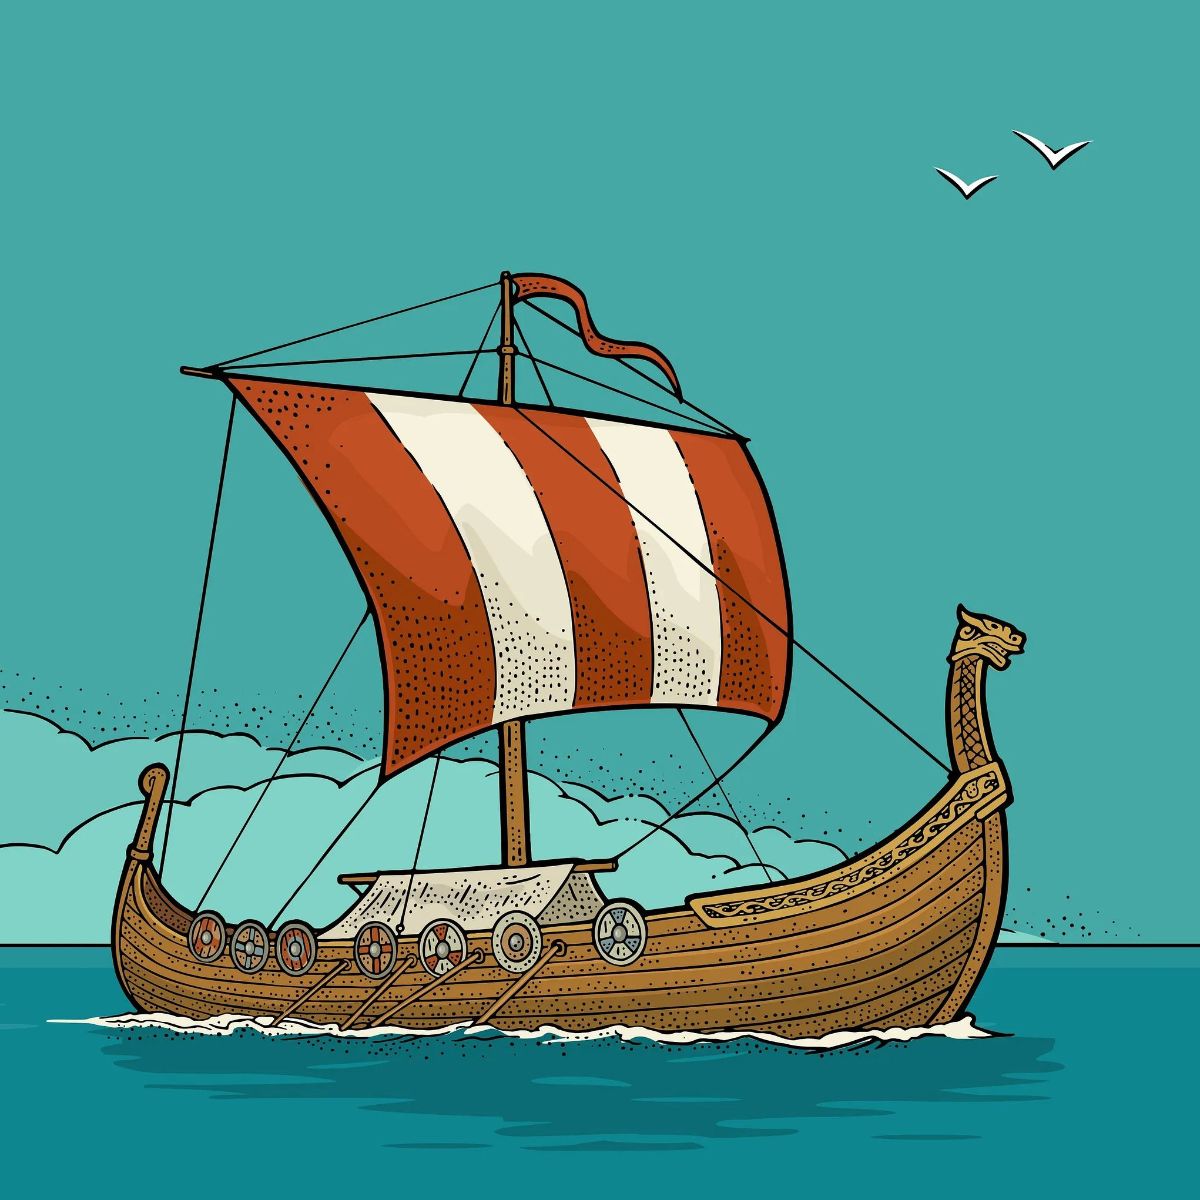 An illustration of a Viking-style ship sailing off of a mountainous coastline.